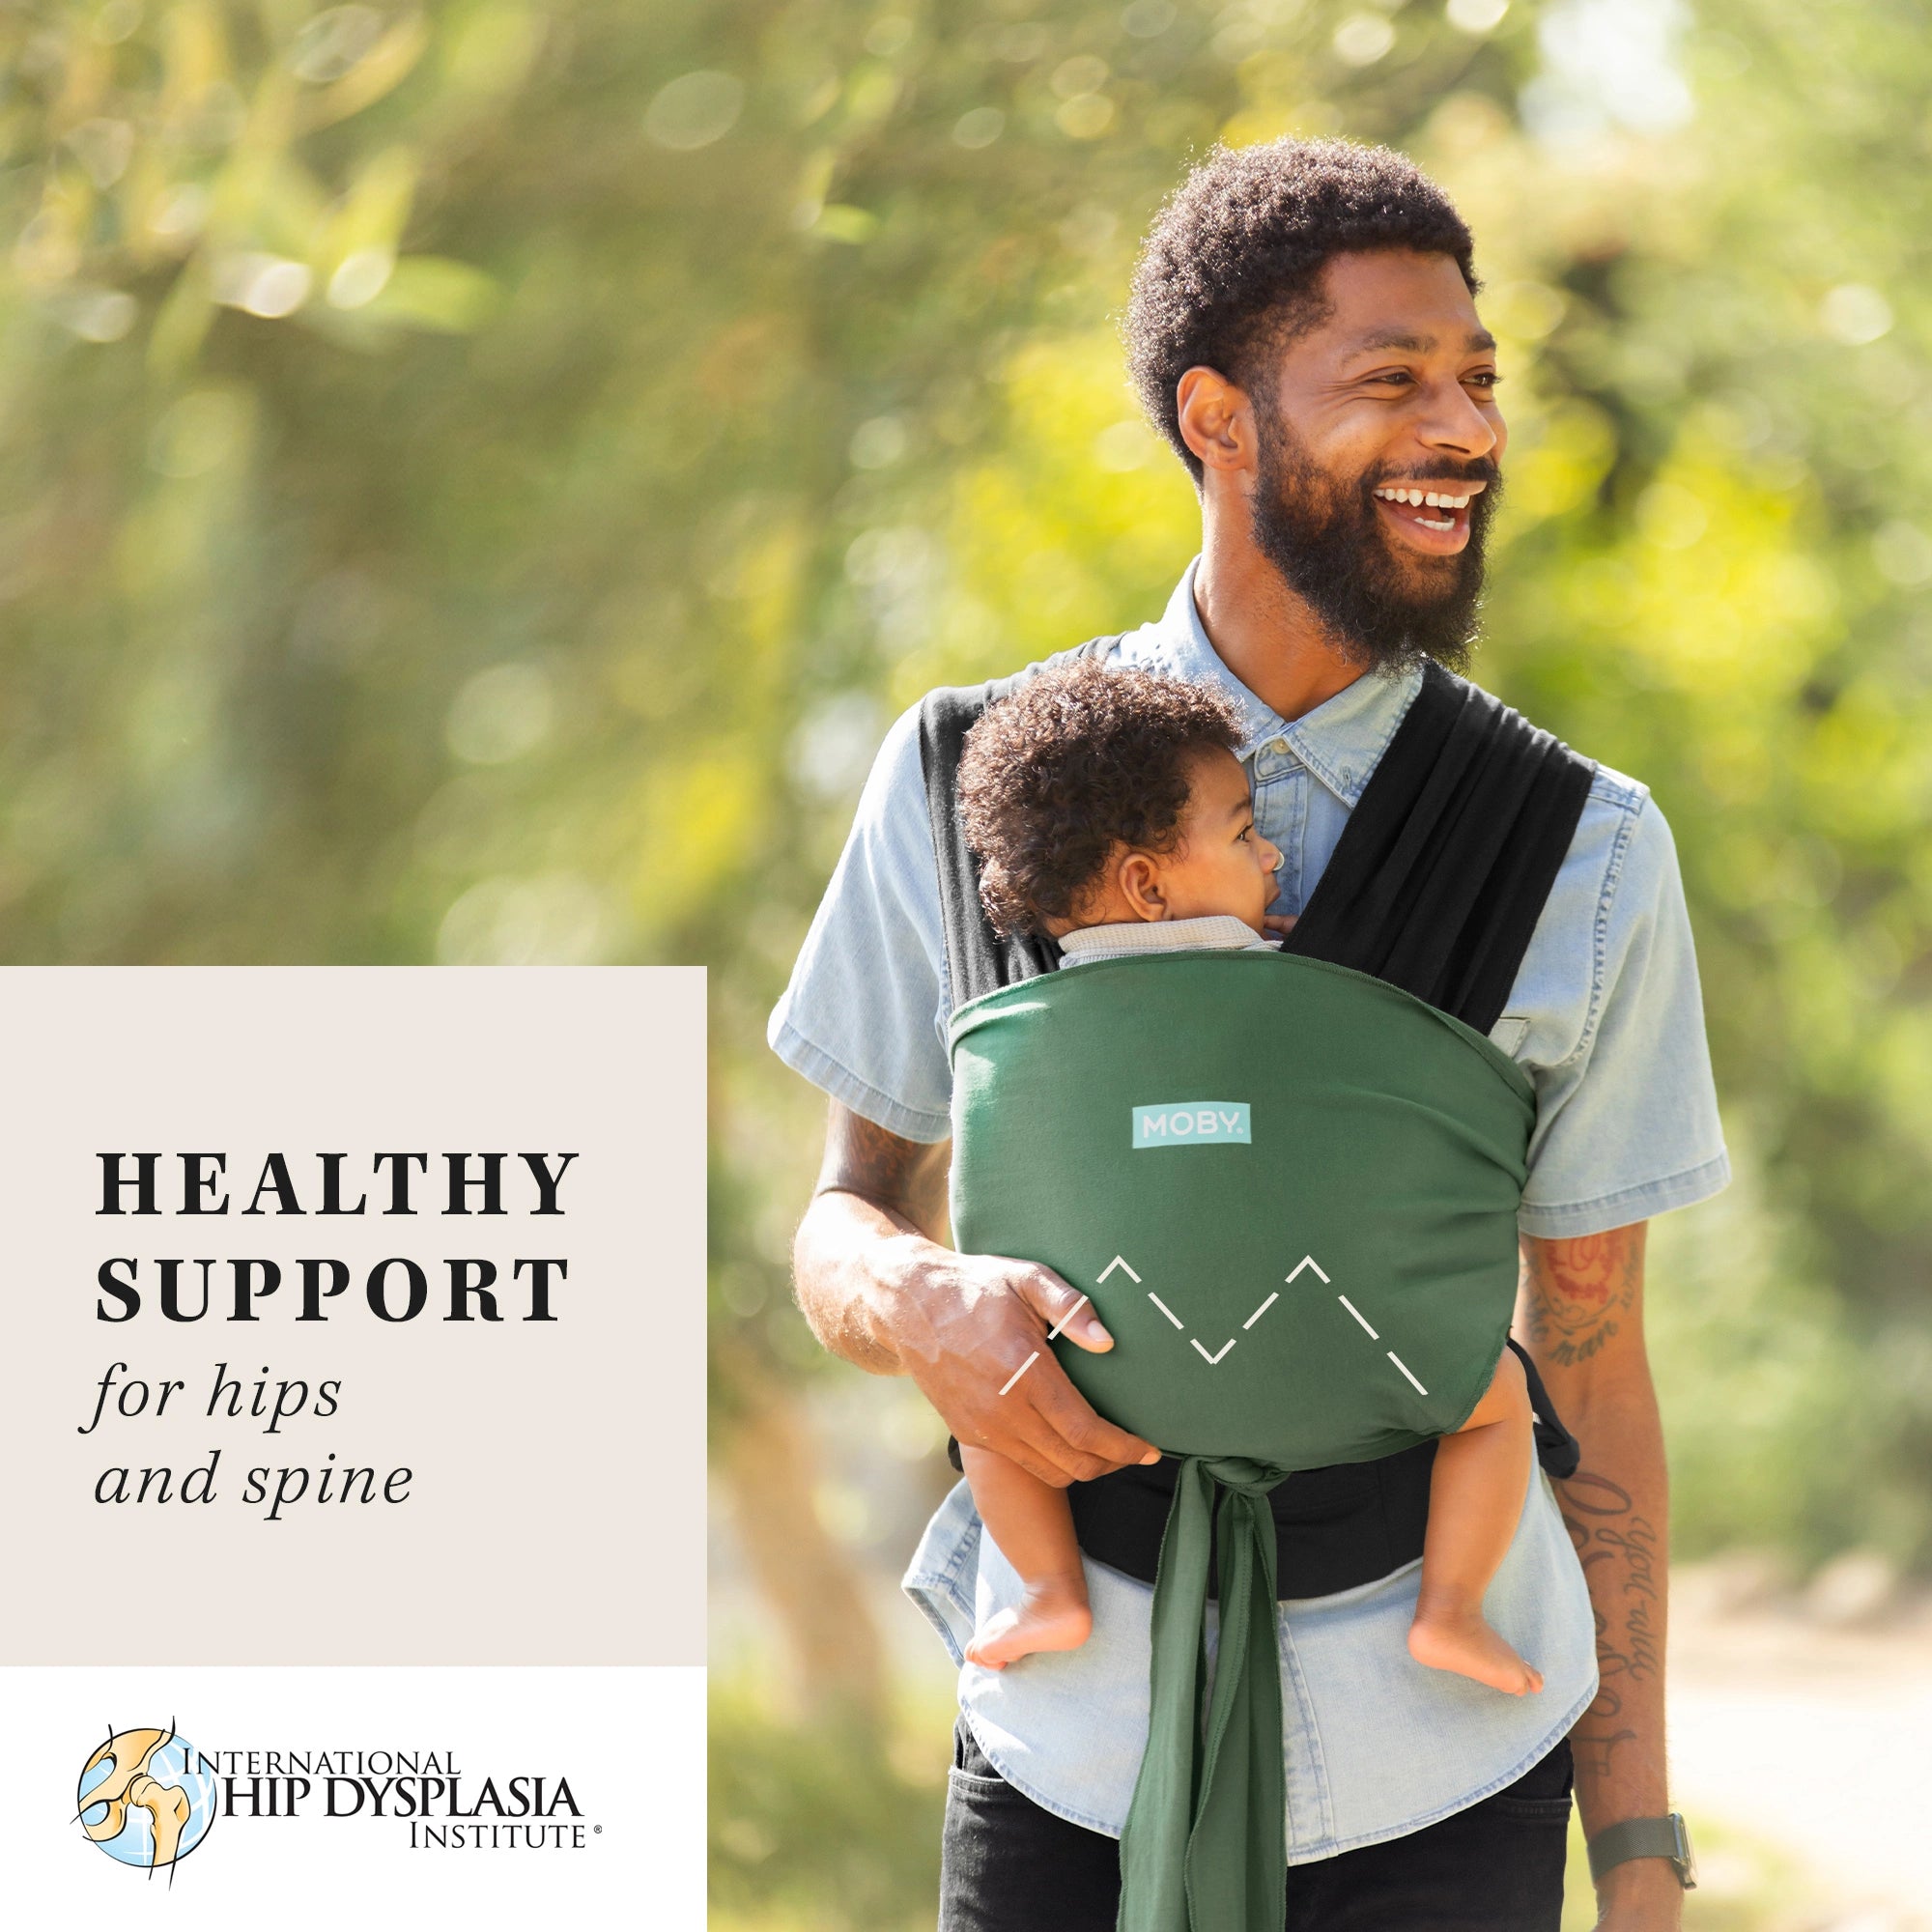 easy-wrap healthy support for hips and spine certified by international hip dysplasia institute